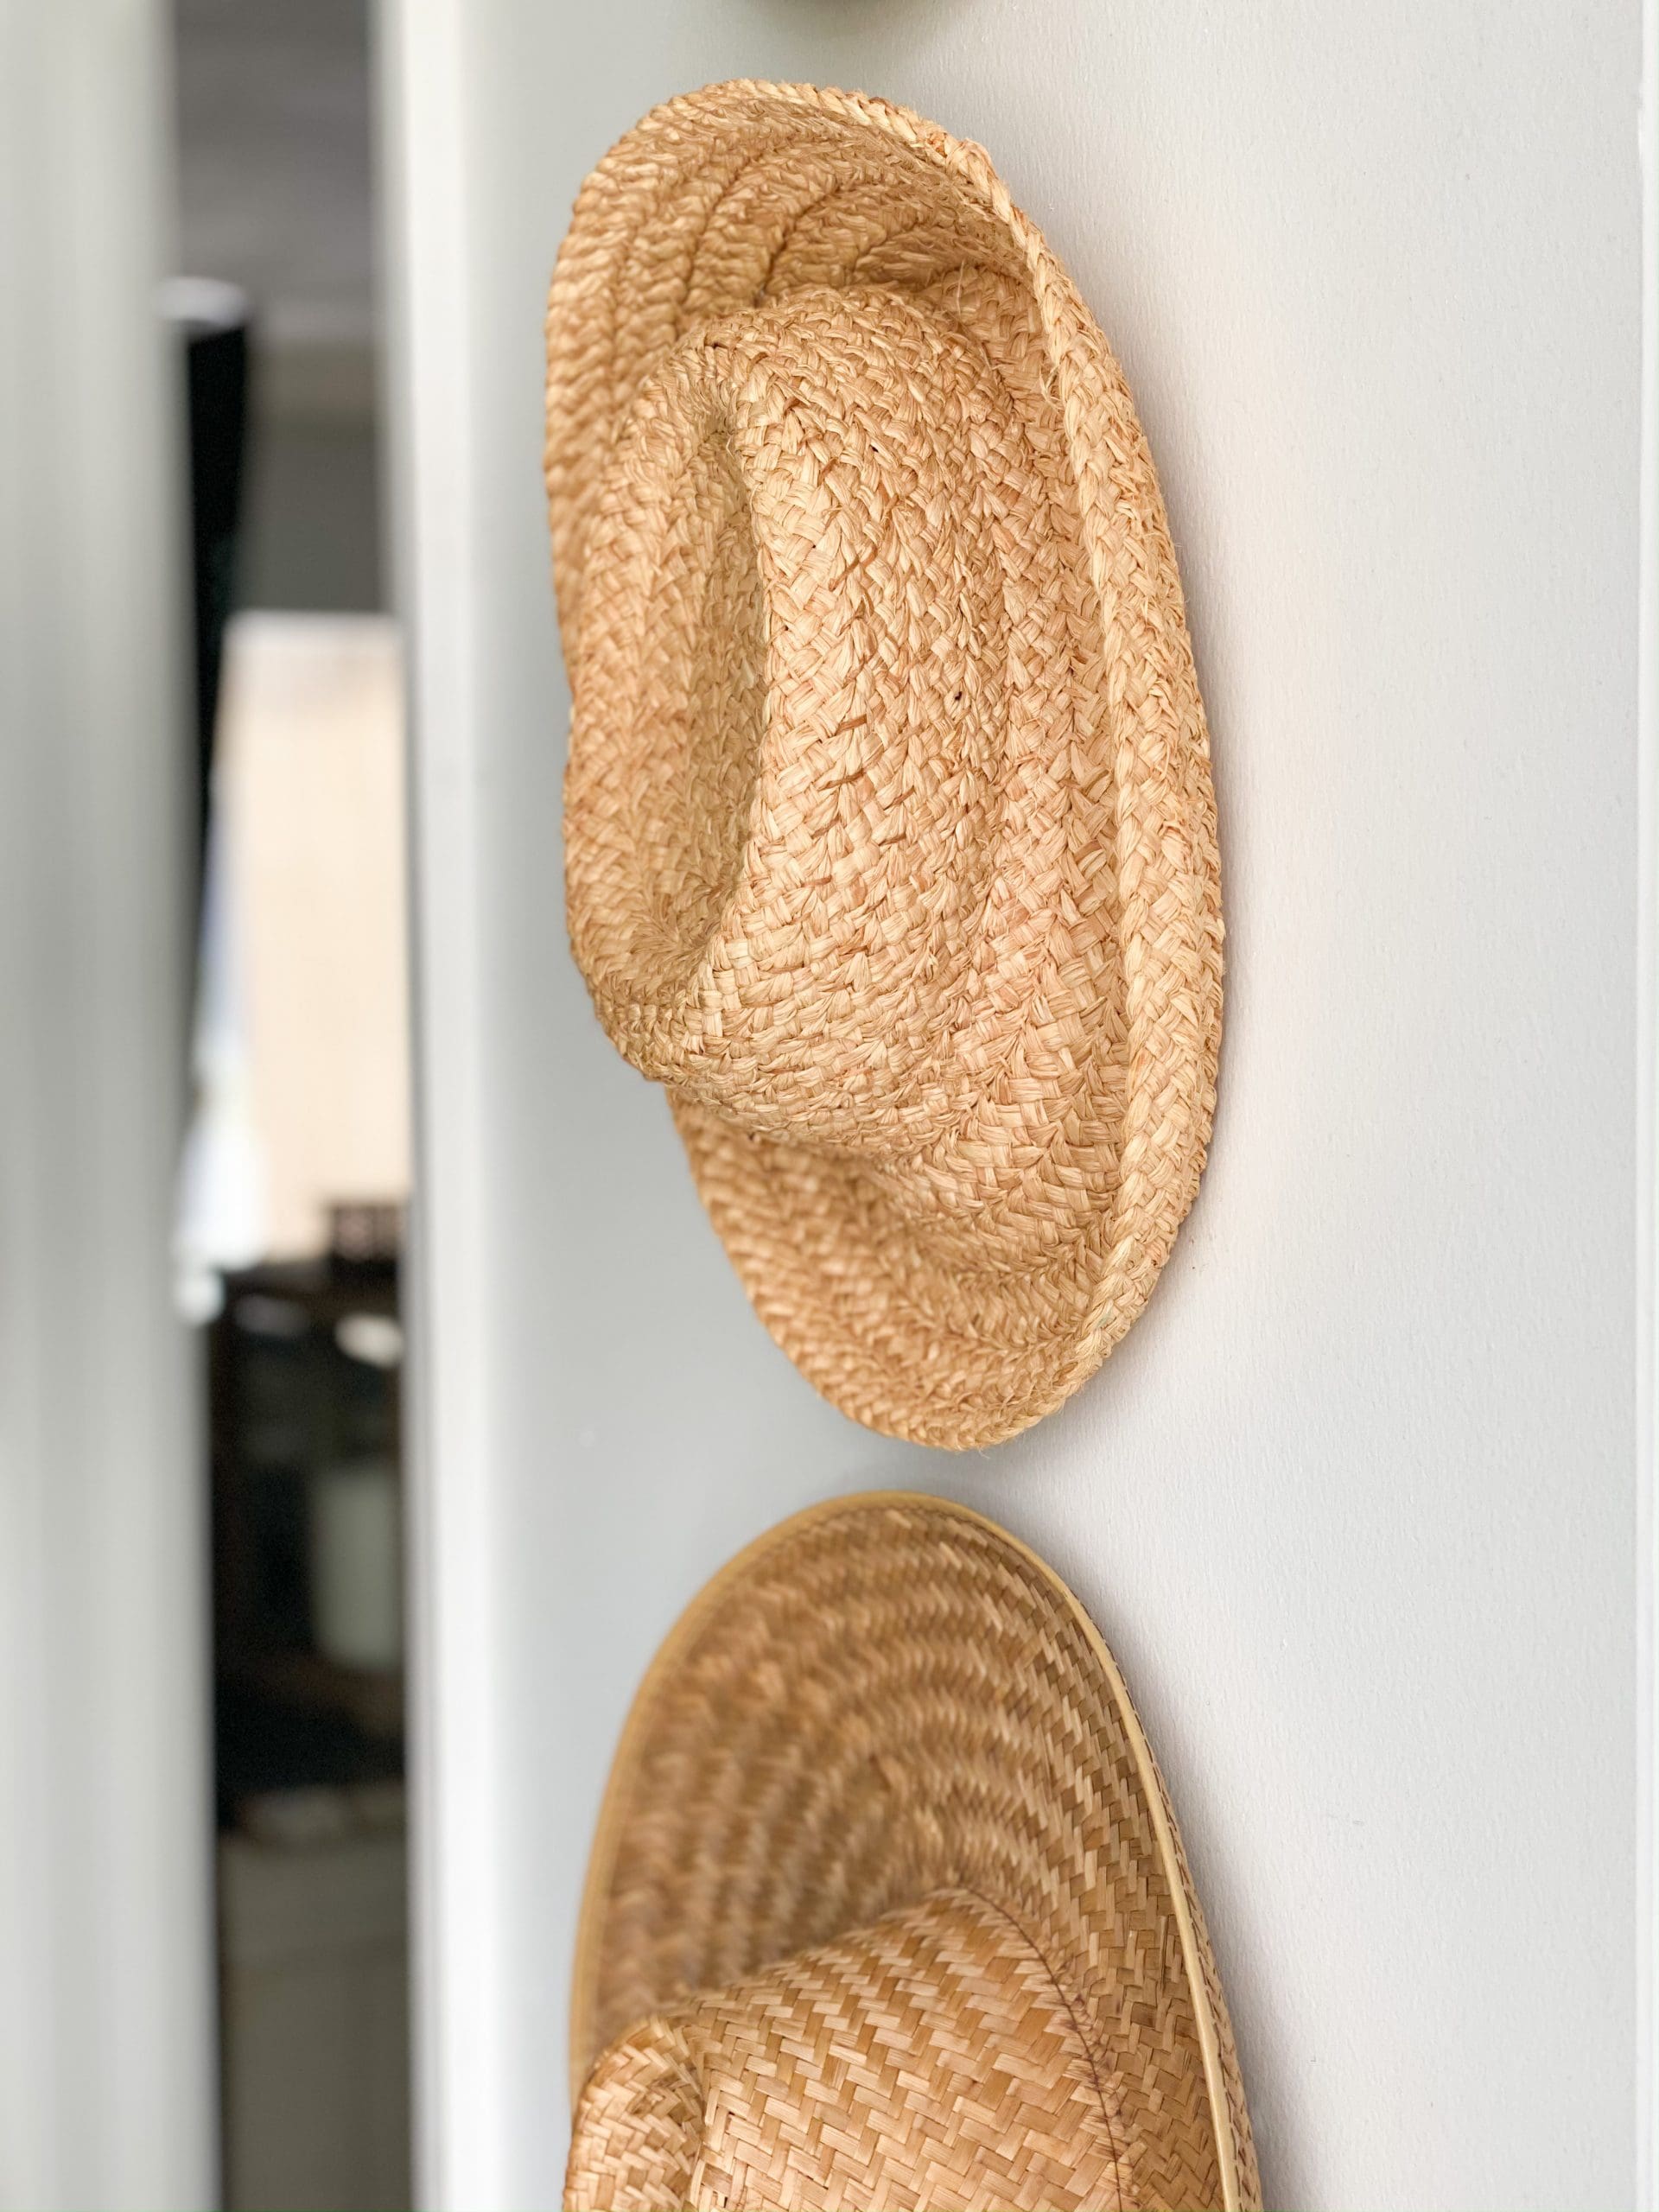 old straw hats hanging on entryway wall